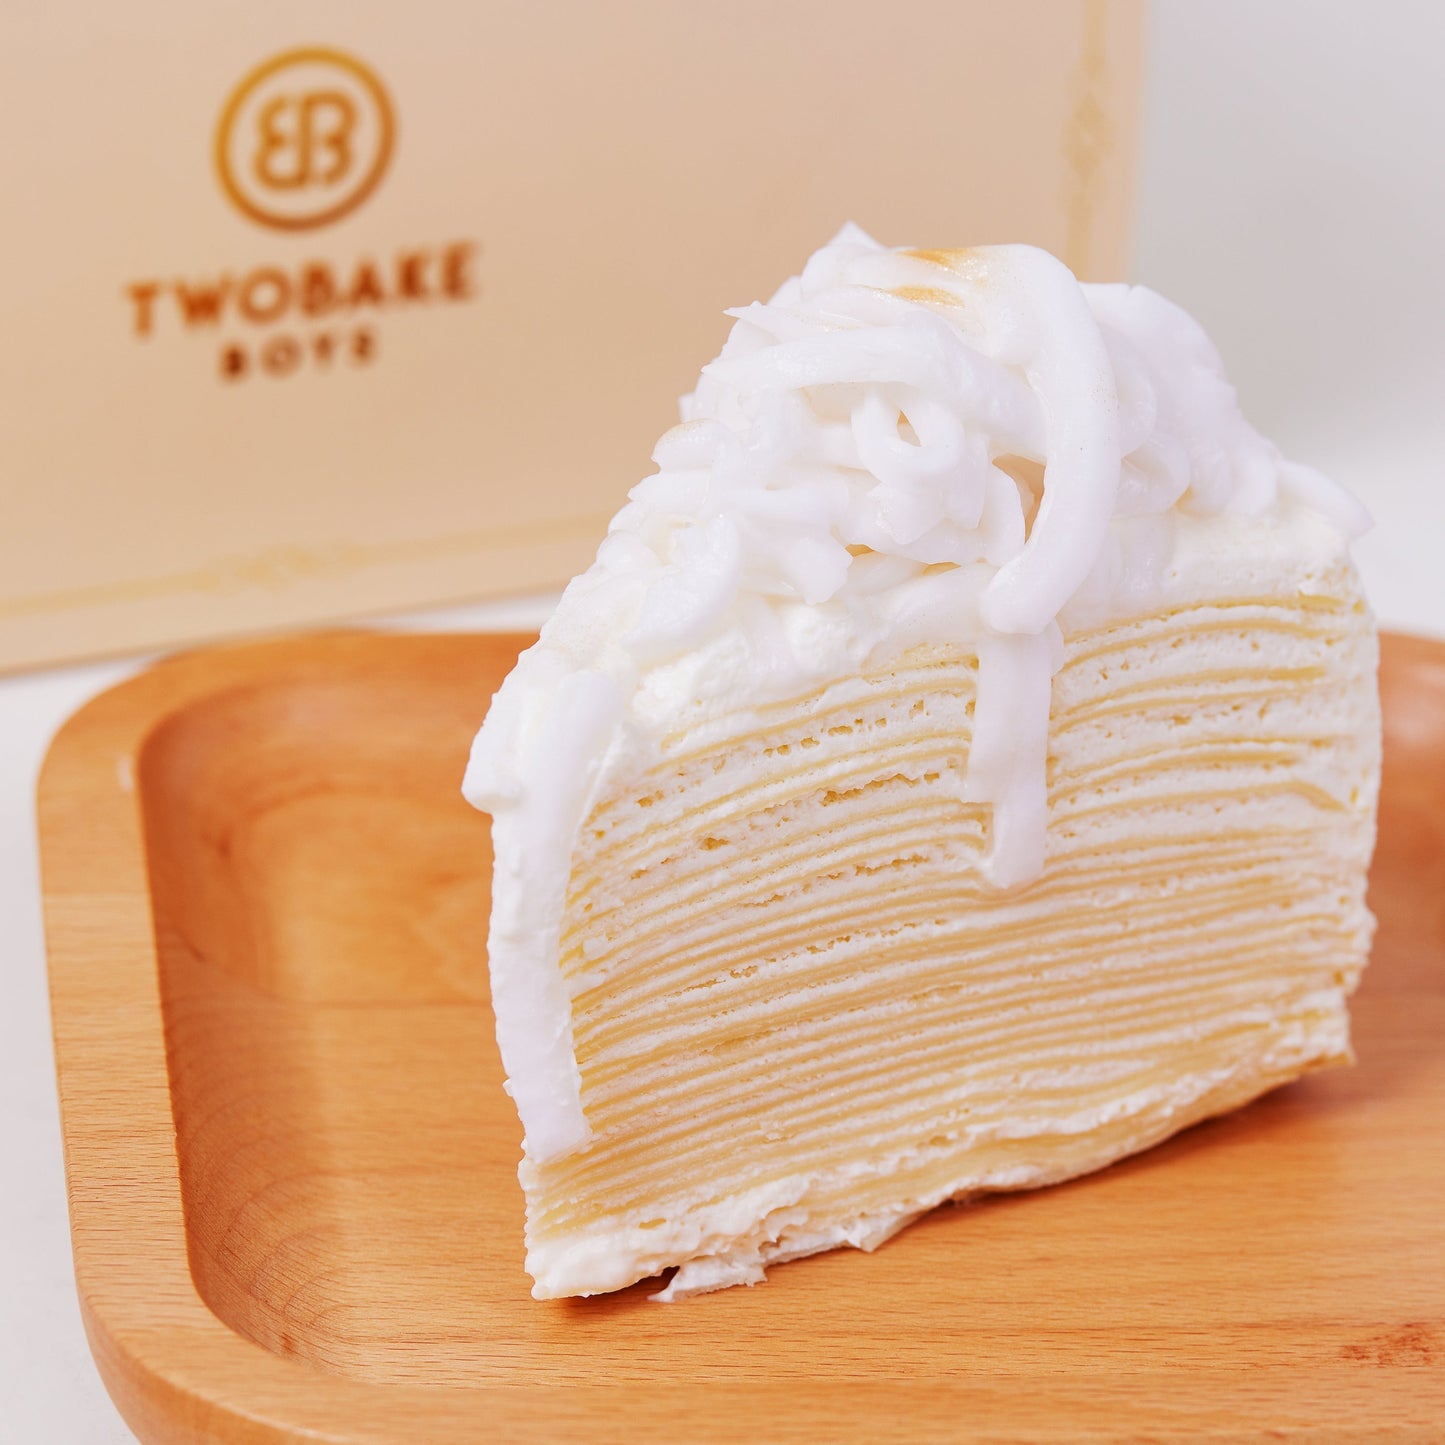 Coconut crepe cake 6" with coconut sauce suitable for 6-8 pax